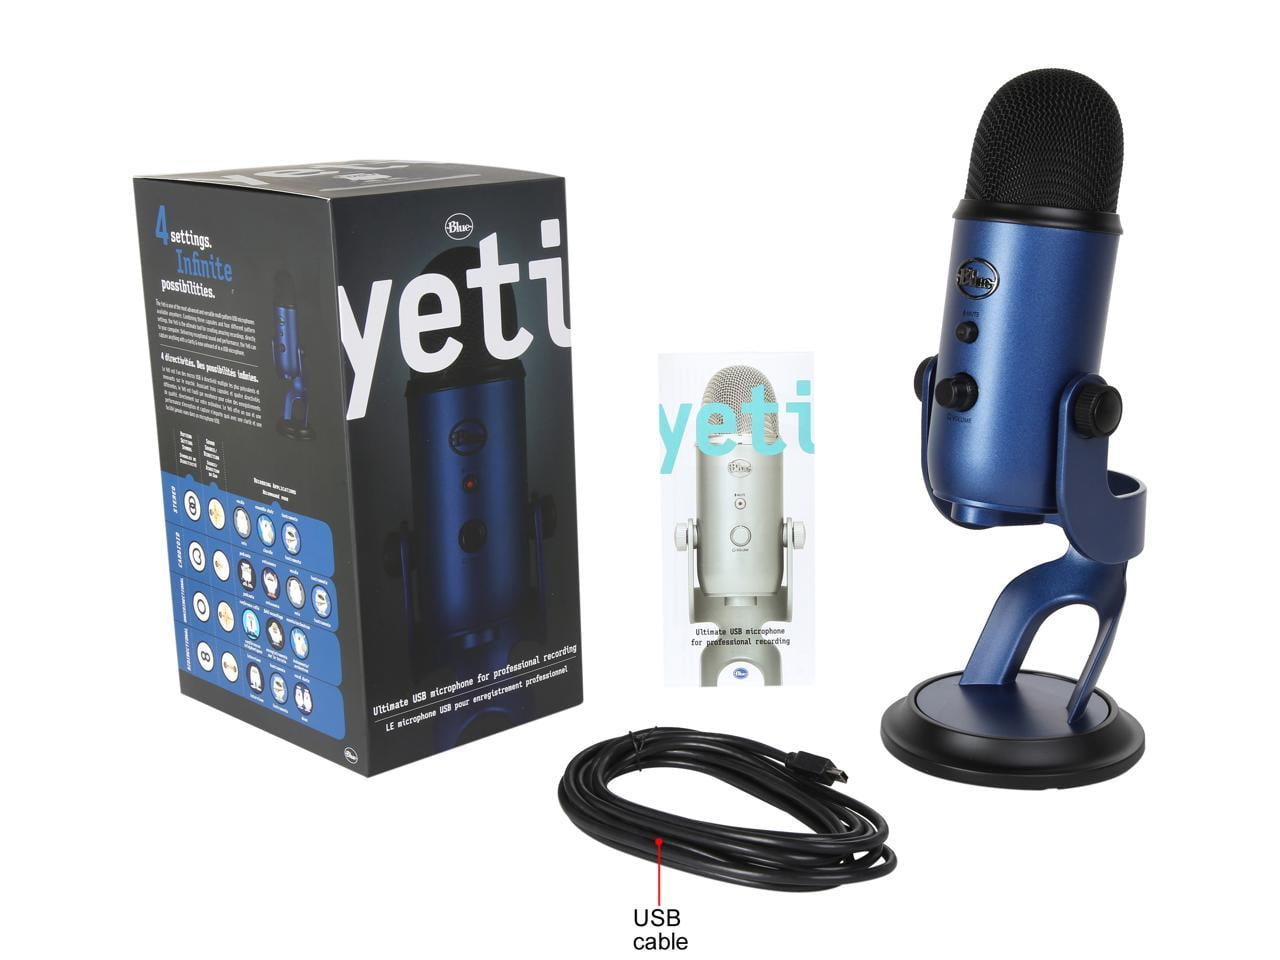  Newest Blue Yeti USB Microphone with 4 Pickup Patterns, 3  Condenser Capsules, Mic Gain Control & Adjustable Stand for Gaming,  Streaming, Podcasting on PC & Mac with GalliumPi Accessories - Silver 